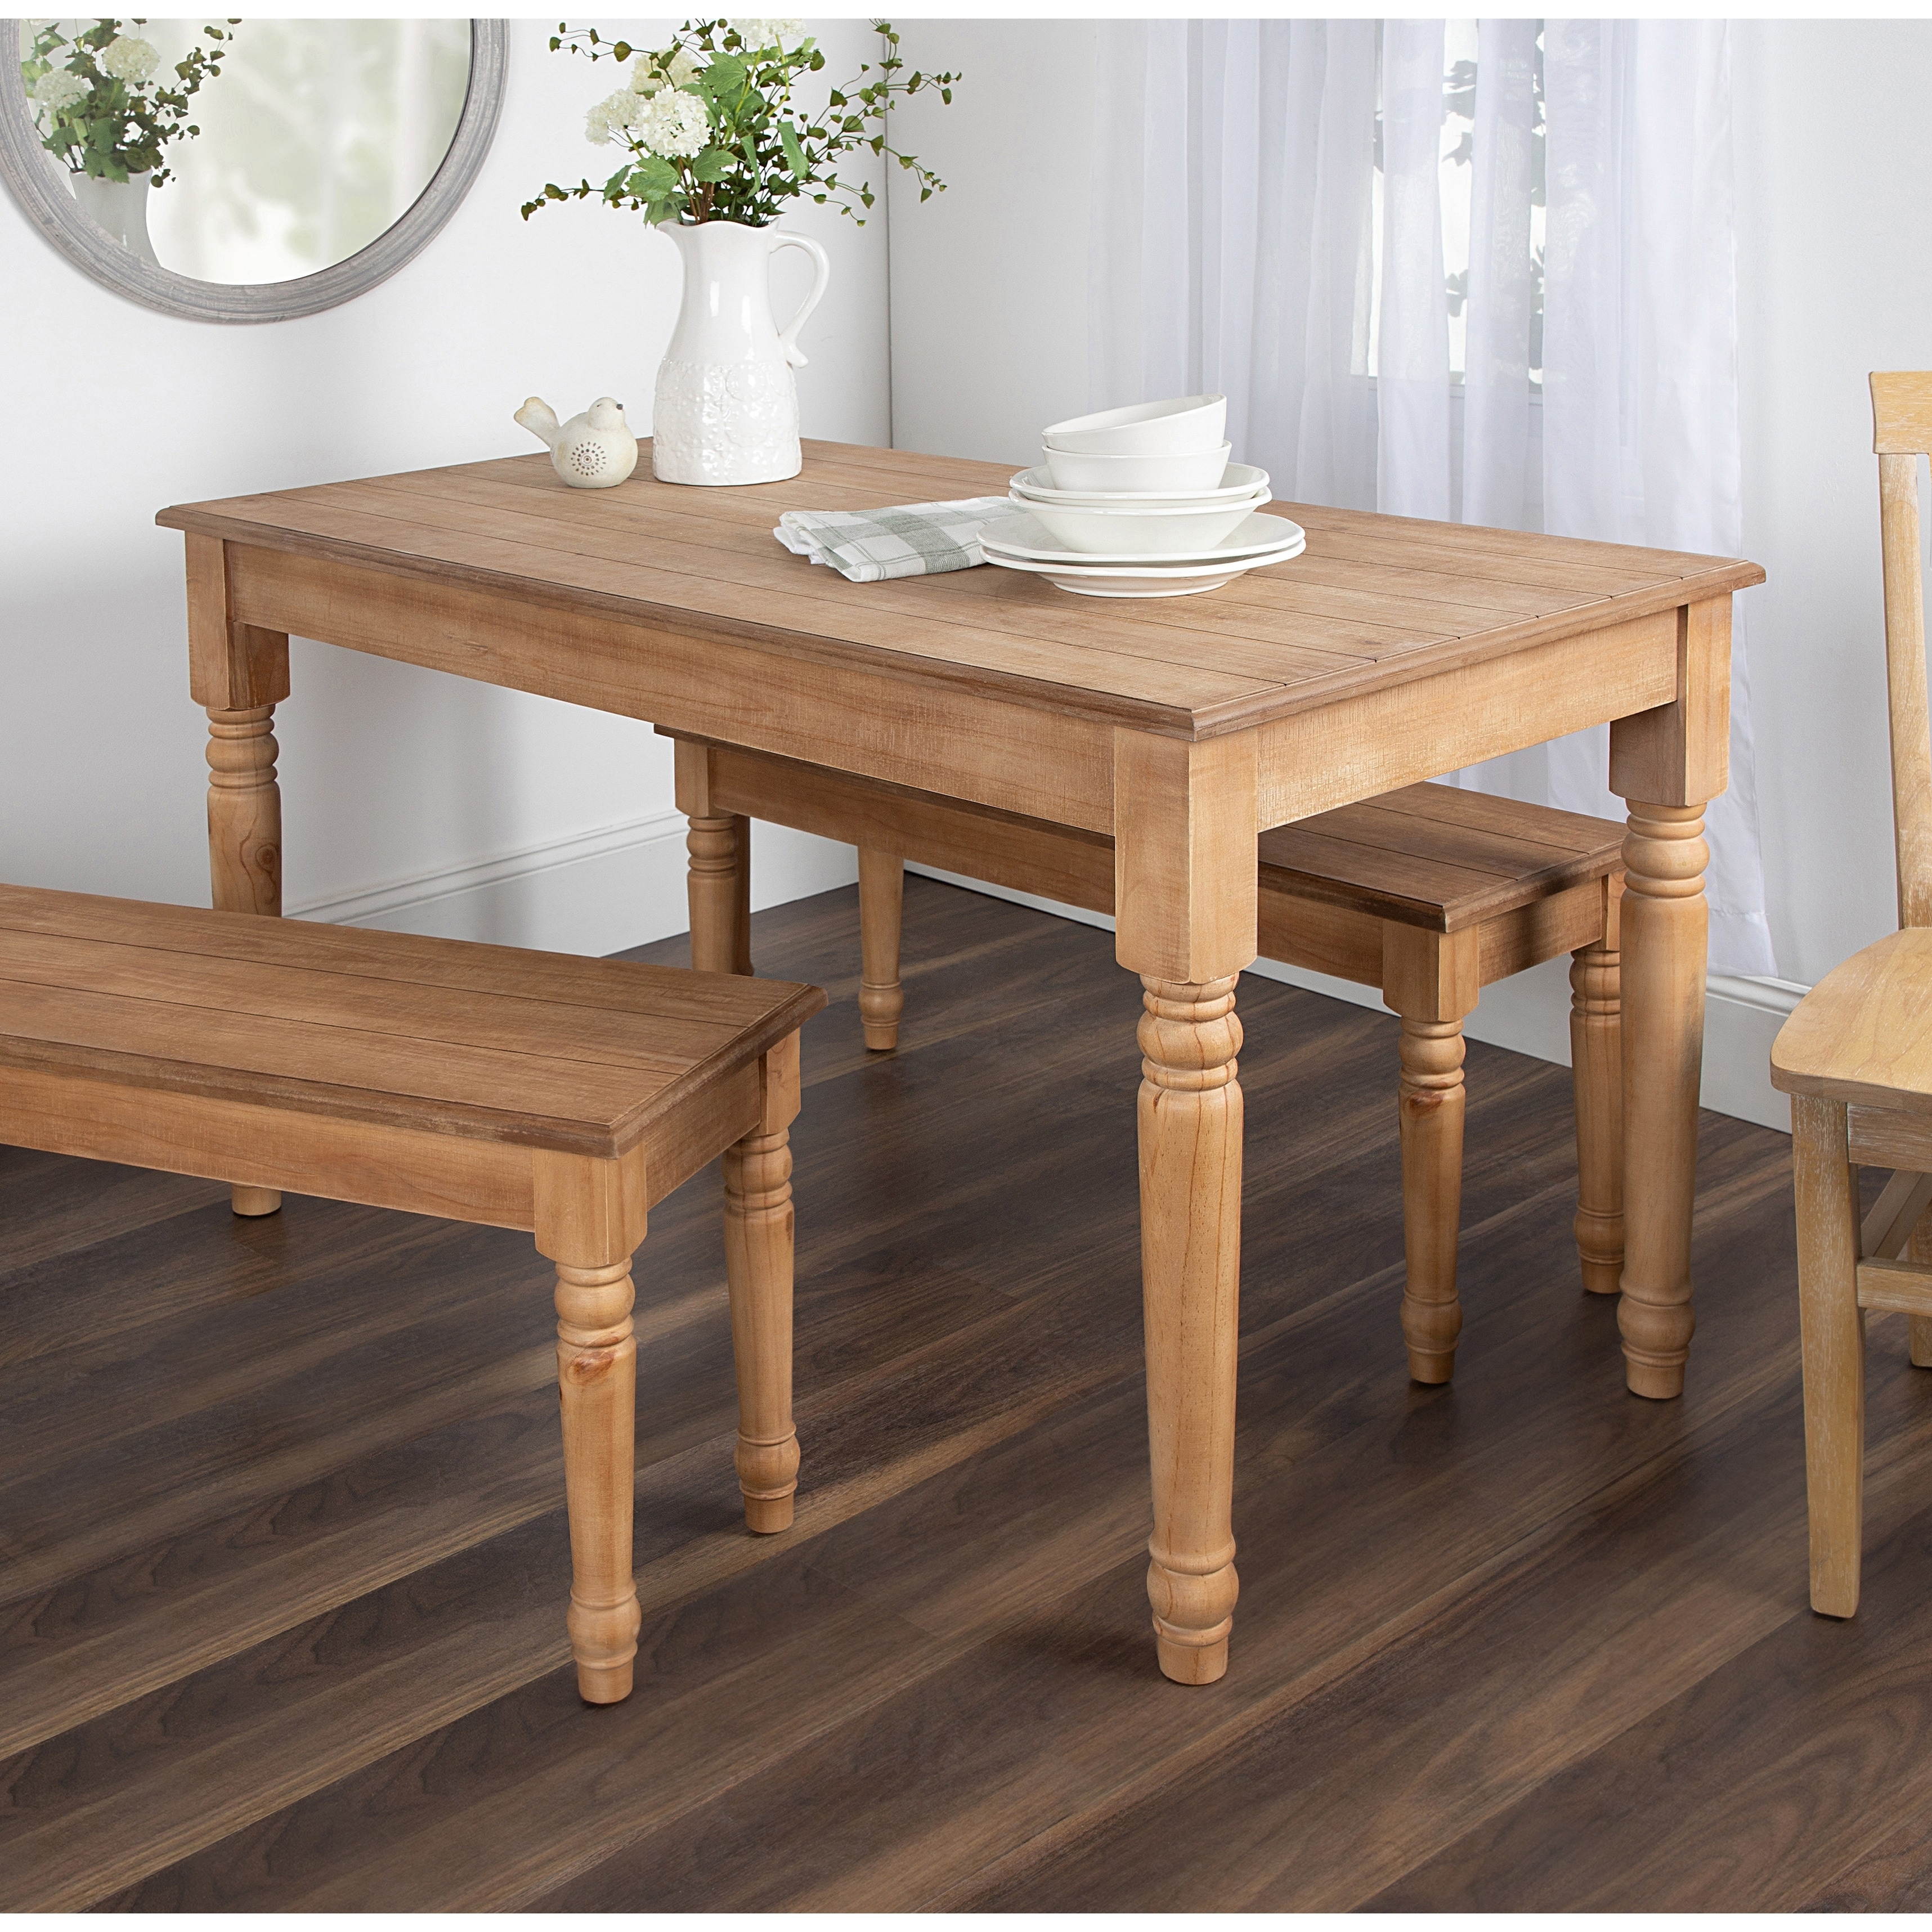 Kate And Laurel Cates Wood Farmhouse Dining Table 54x30x30 Overstock 25457721 White